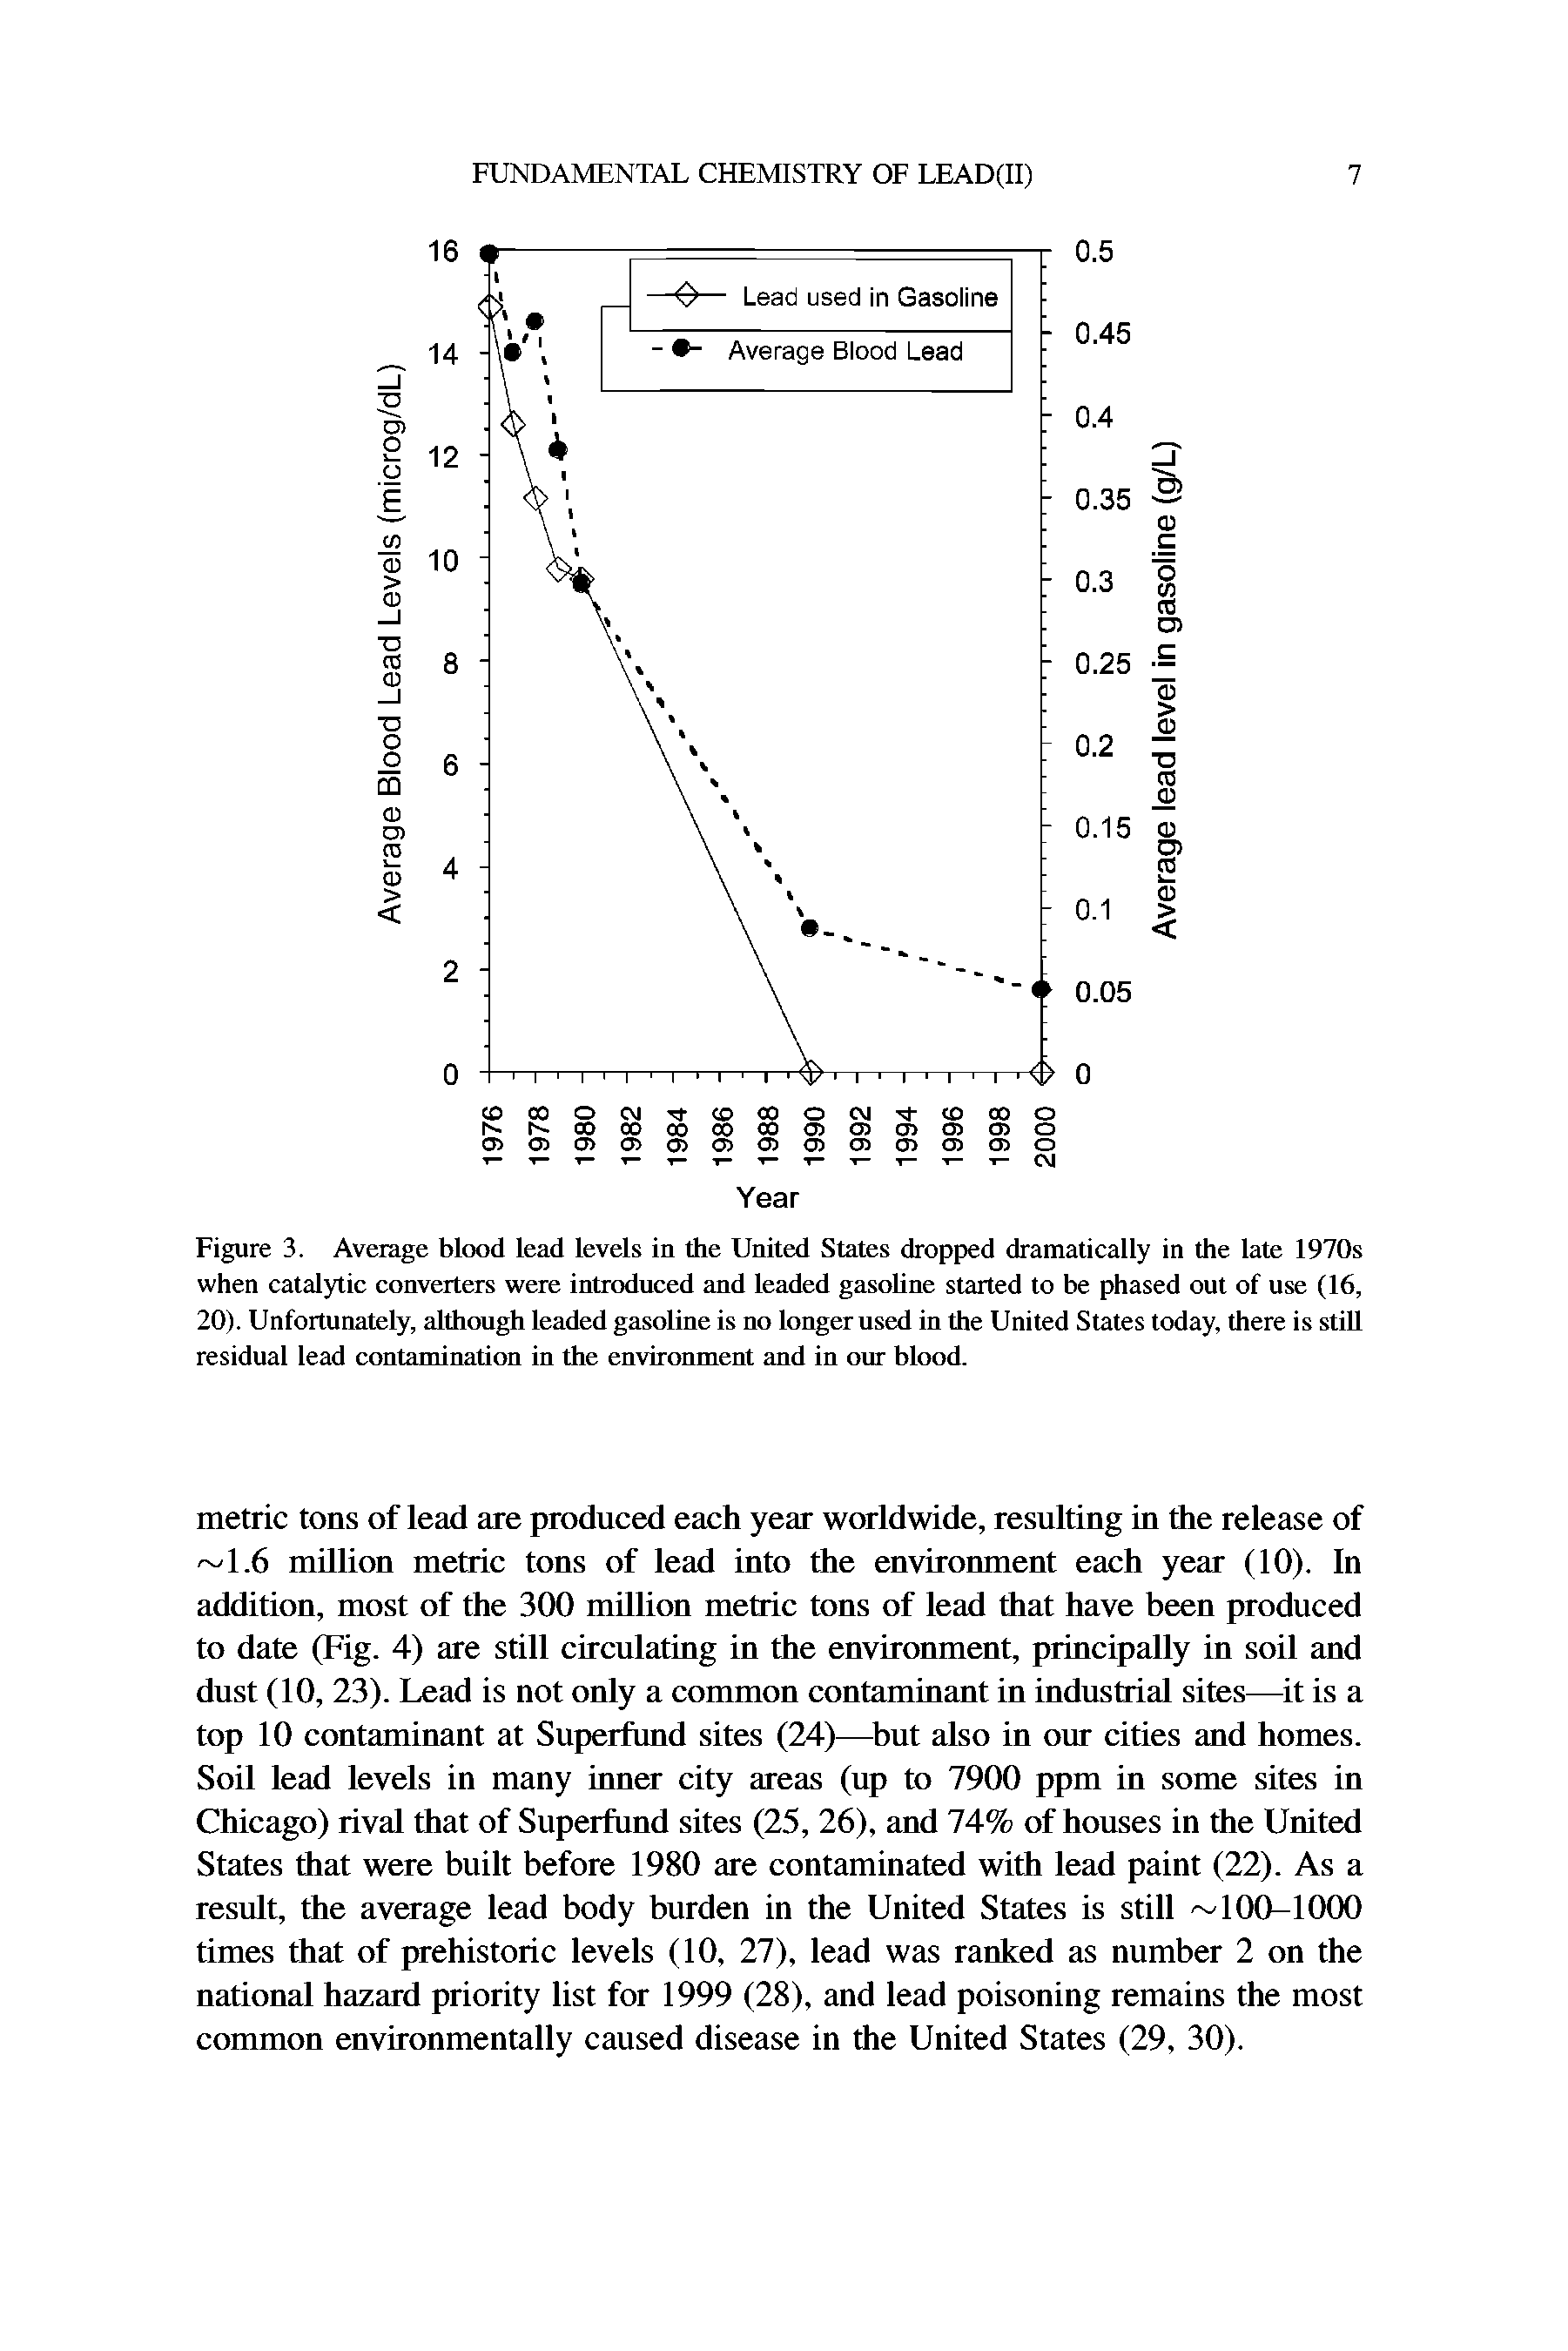 Figure 3. Average blood lead levels in the United States dropped dramatically in the late 1970s when catalytic converters were introduced and leaded gasohne started to be phased out of use (16, 20). Unfortunately, although leaded gasoline is no longer used in the United States today, there is still residual lead contamination in the environment and in our blood.